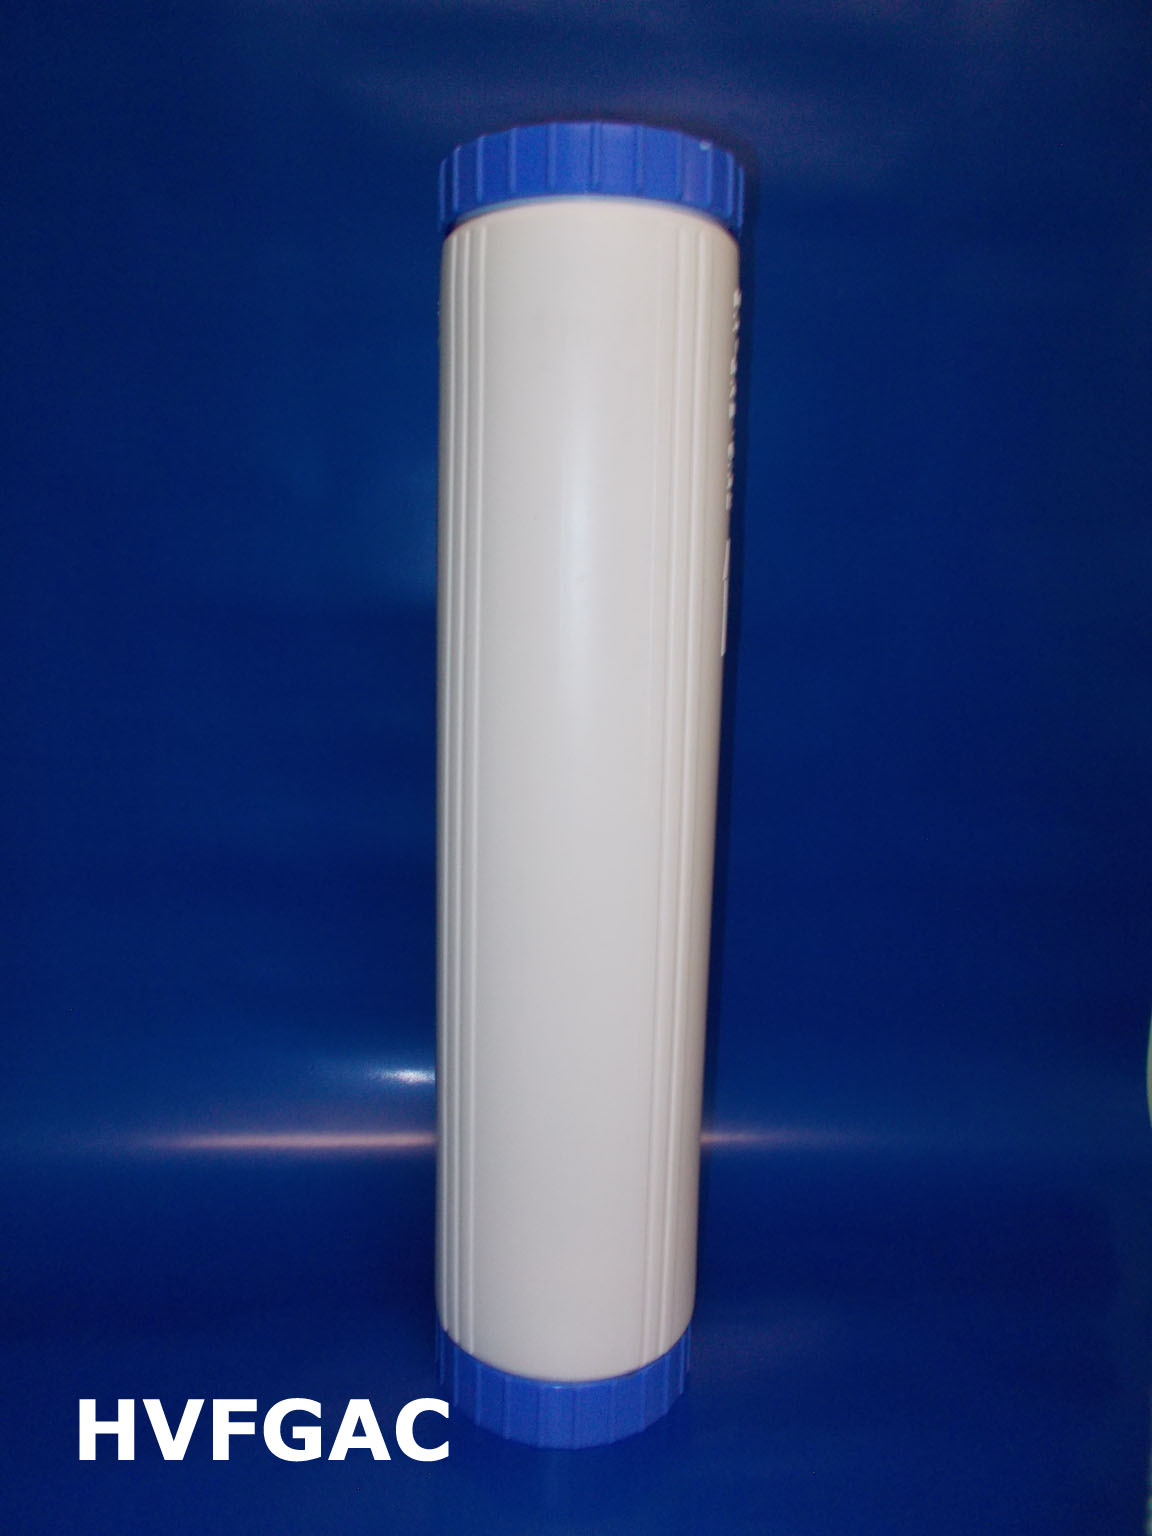 Replacement Chlorine Water Filter. Coconut shell carbon water filter 15,000 gallon capacity 4.5" x 2